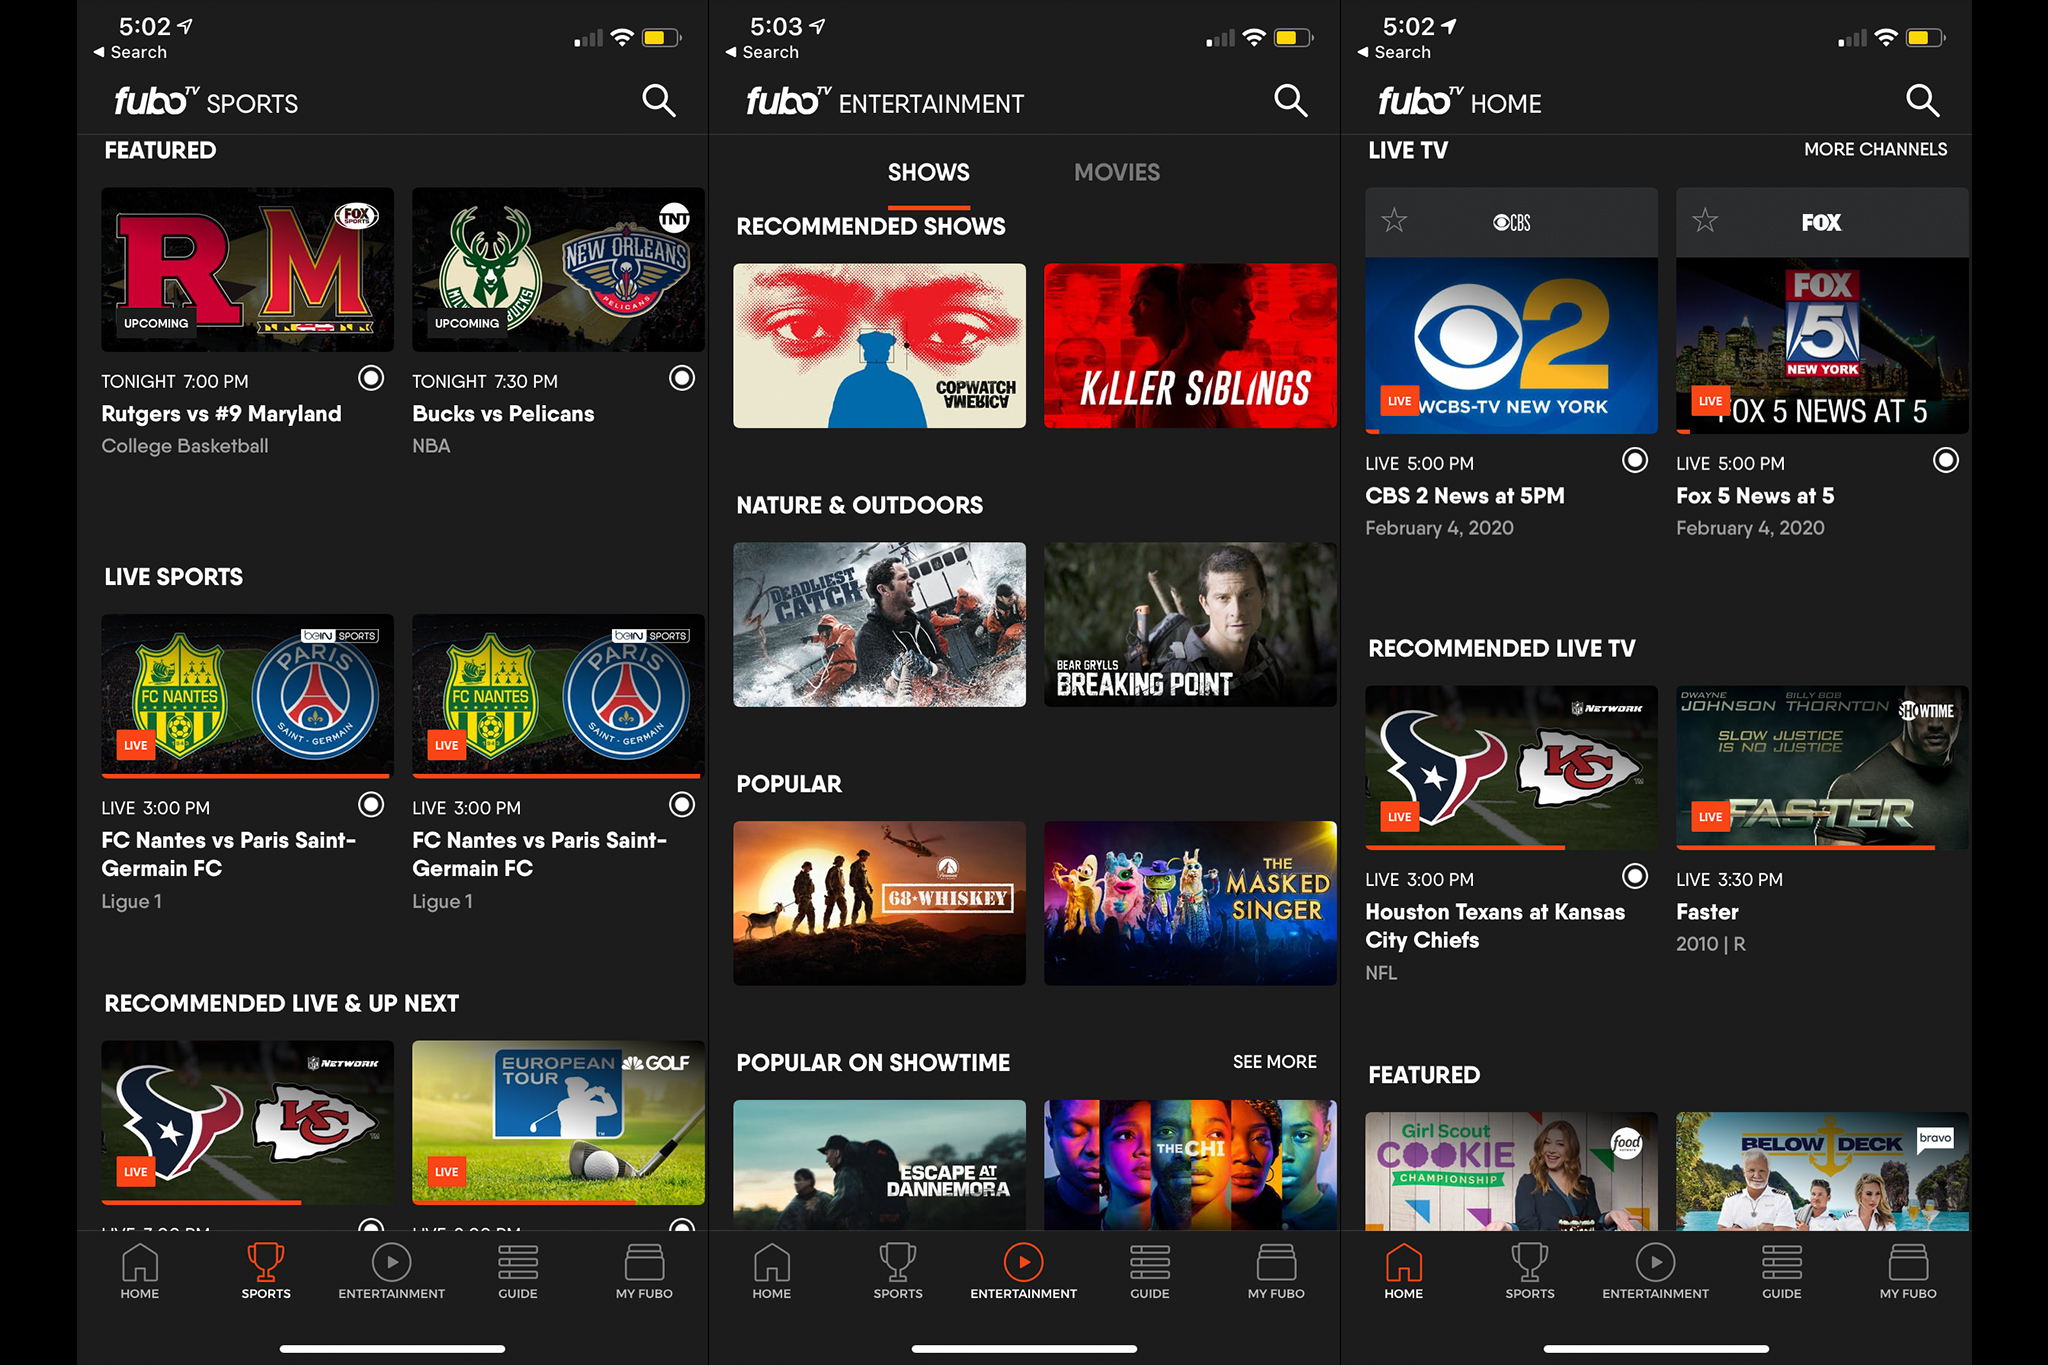 fuboTV is a favored IPTV Service utilized by thousands of cord-cutters across the globe for viewing live channels.